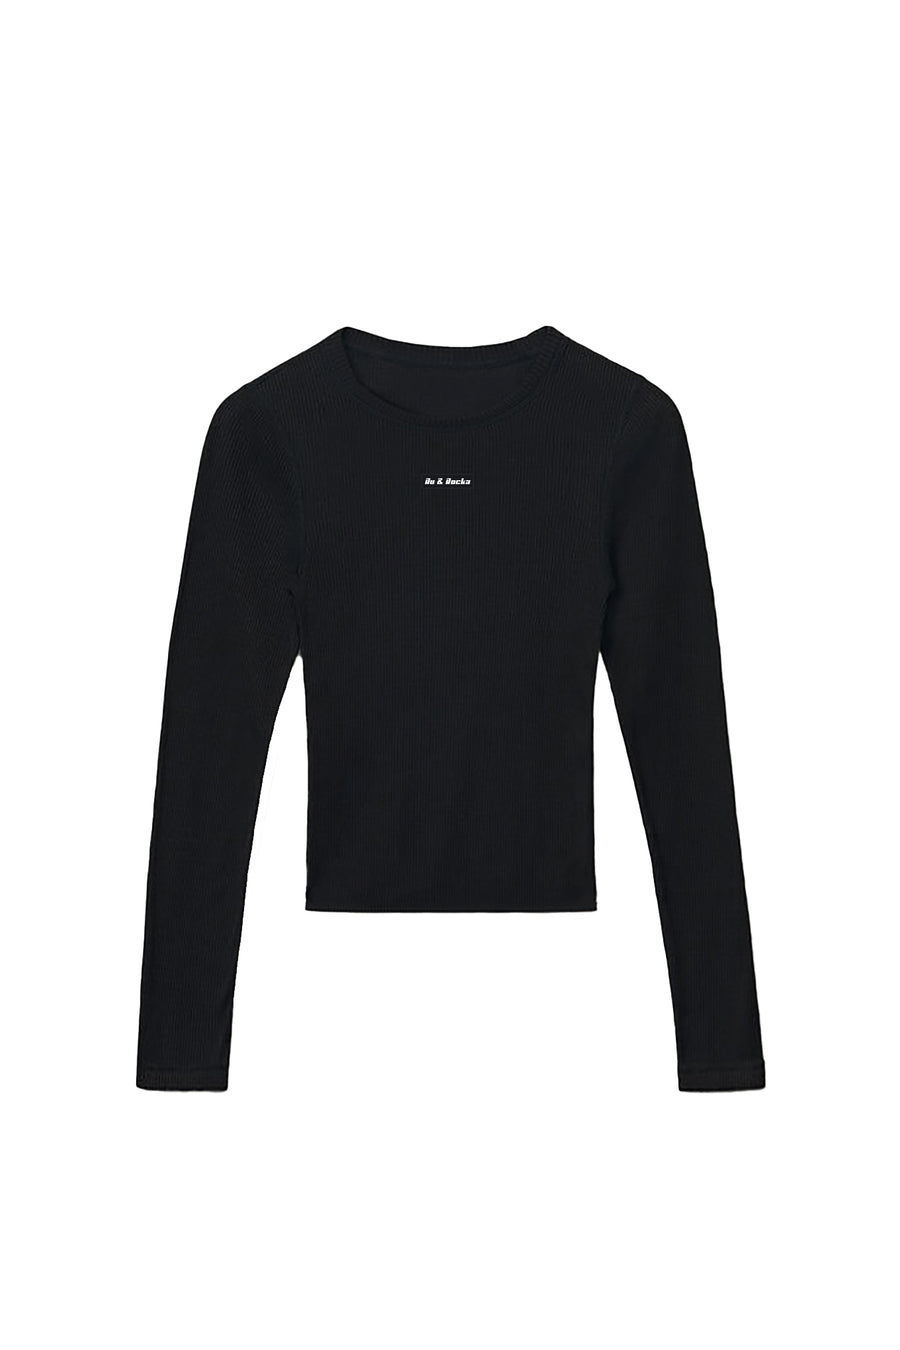 Black Long Sleeve Ribbed Cotton Top